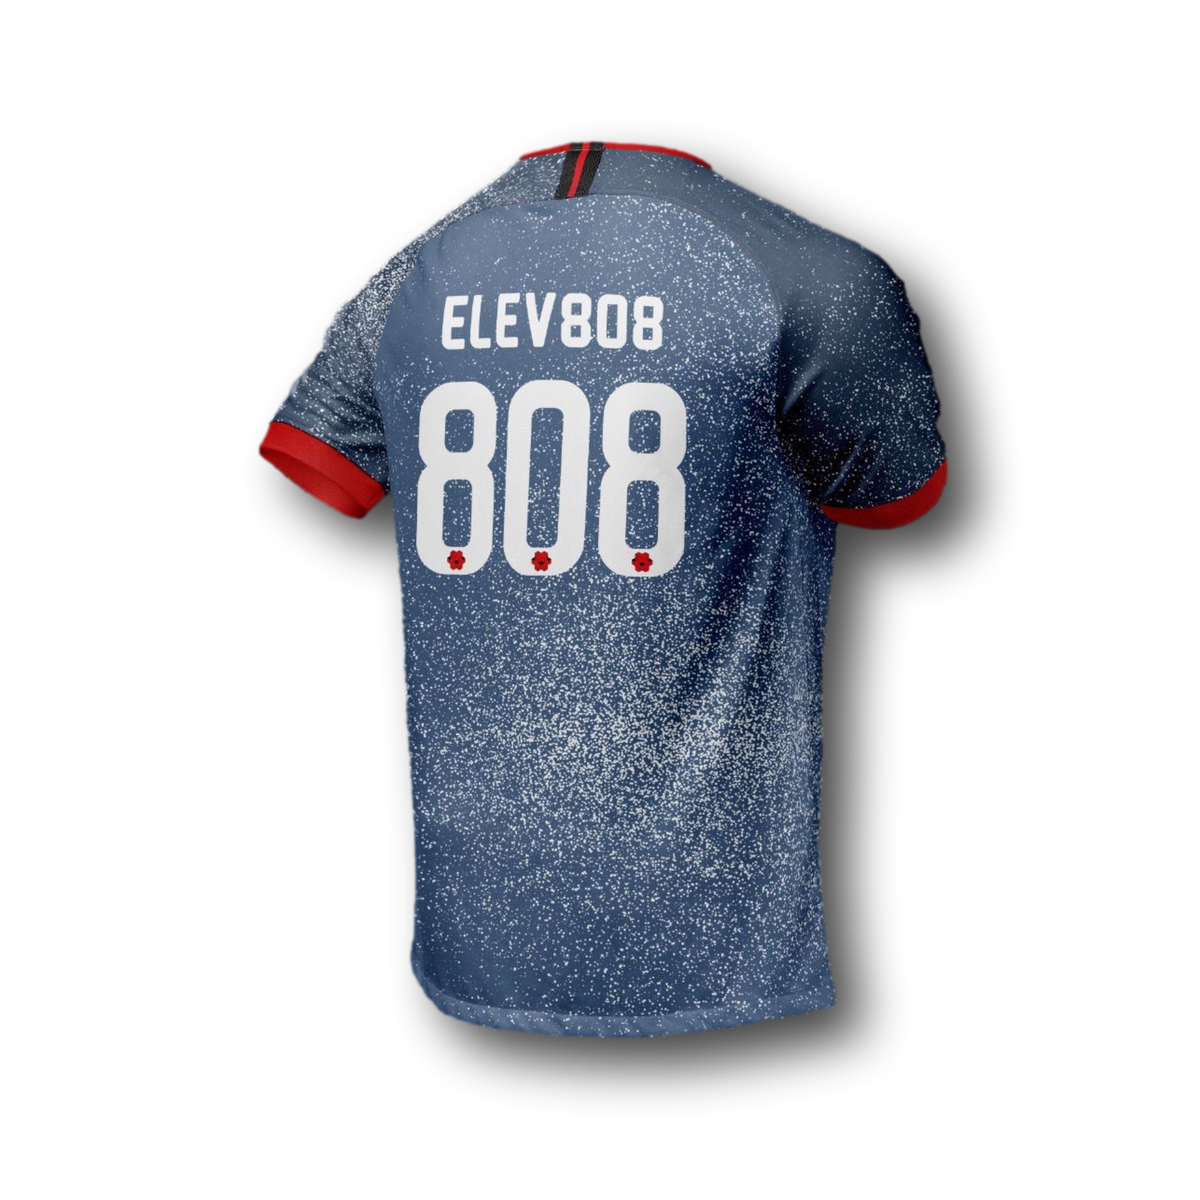 USA 808 Blue and White Cube Soccer Jersey - LE75